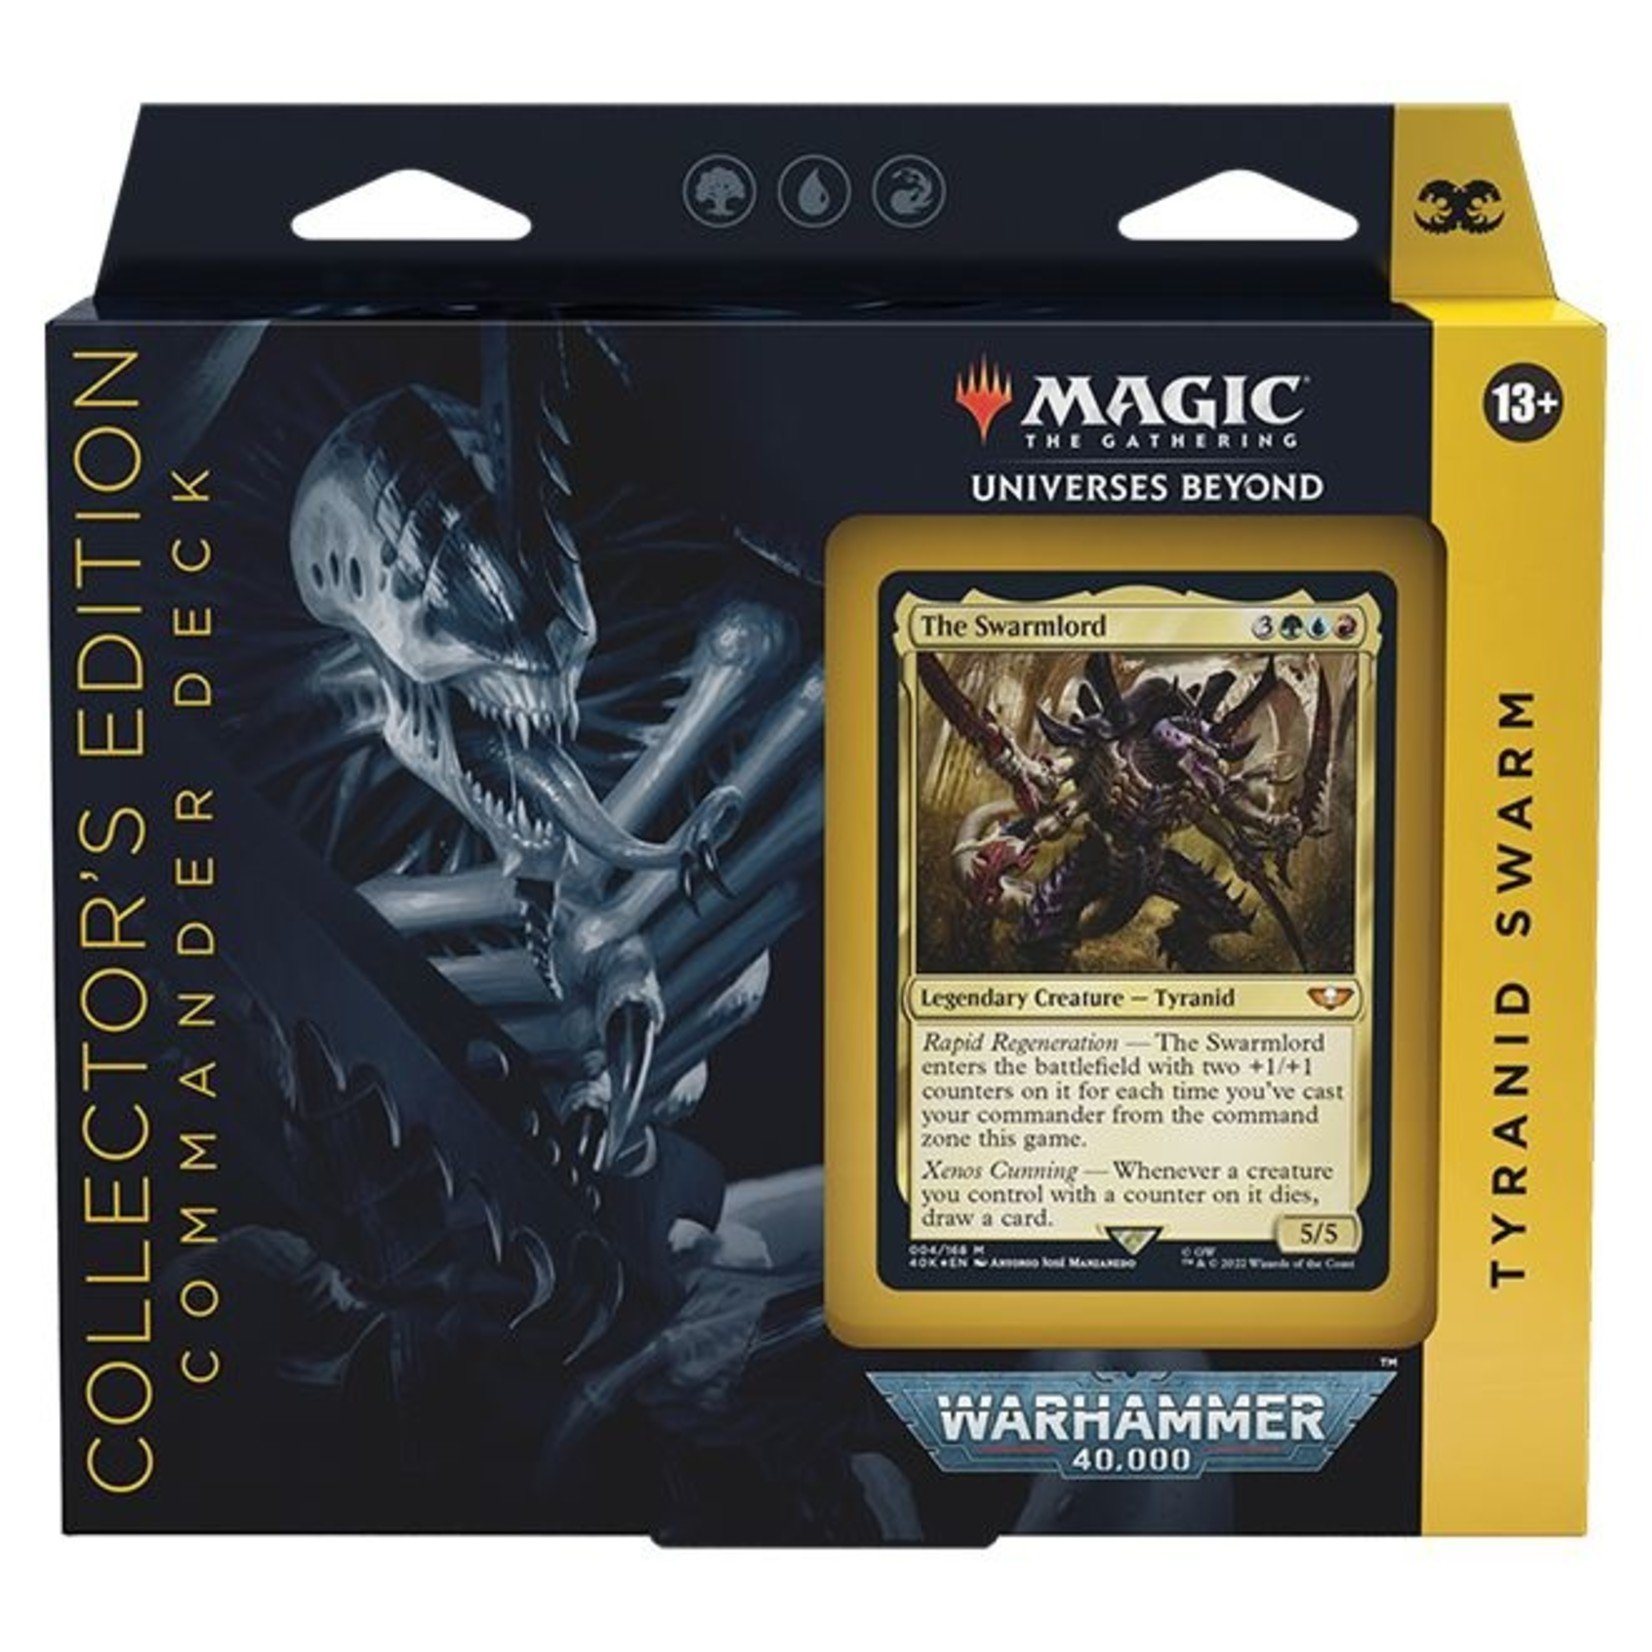 Wizards of the Coast Magic the Gathering: Warhammer 40K Commander Deck - Tyranid Swarm Collector's Edition